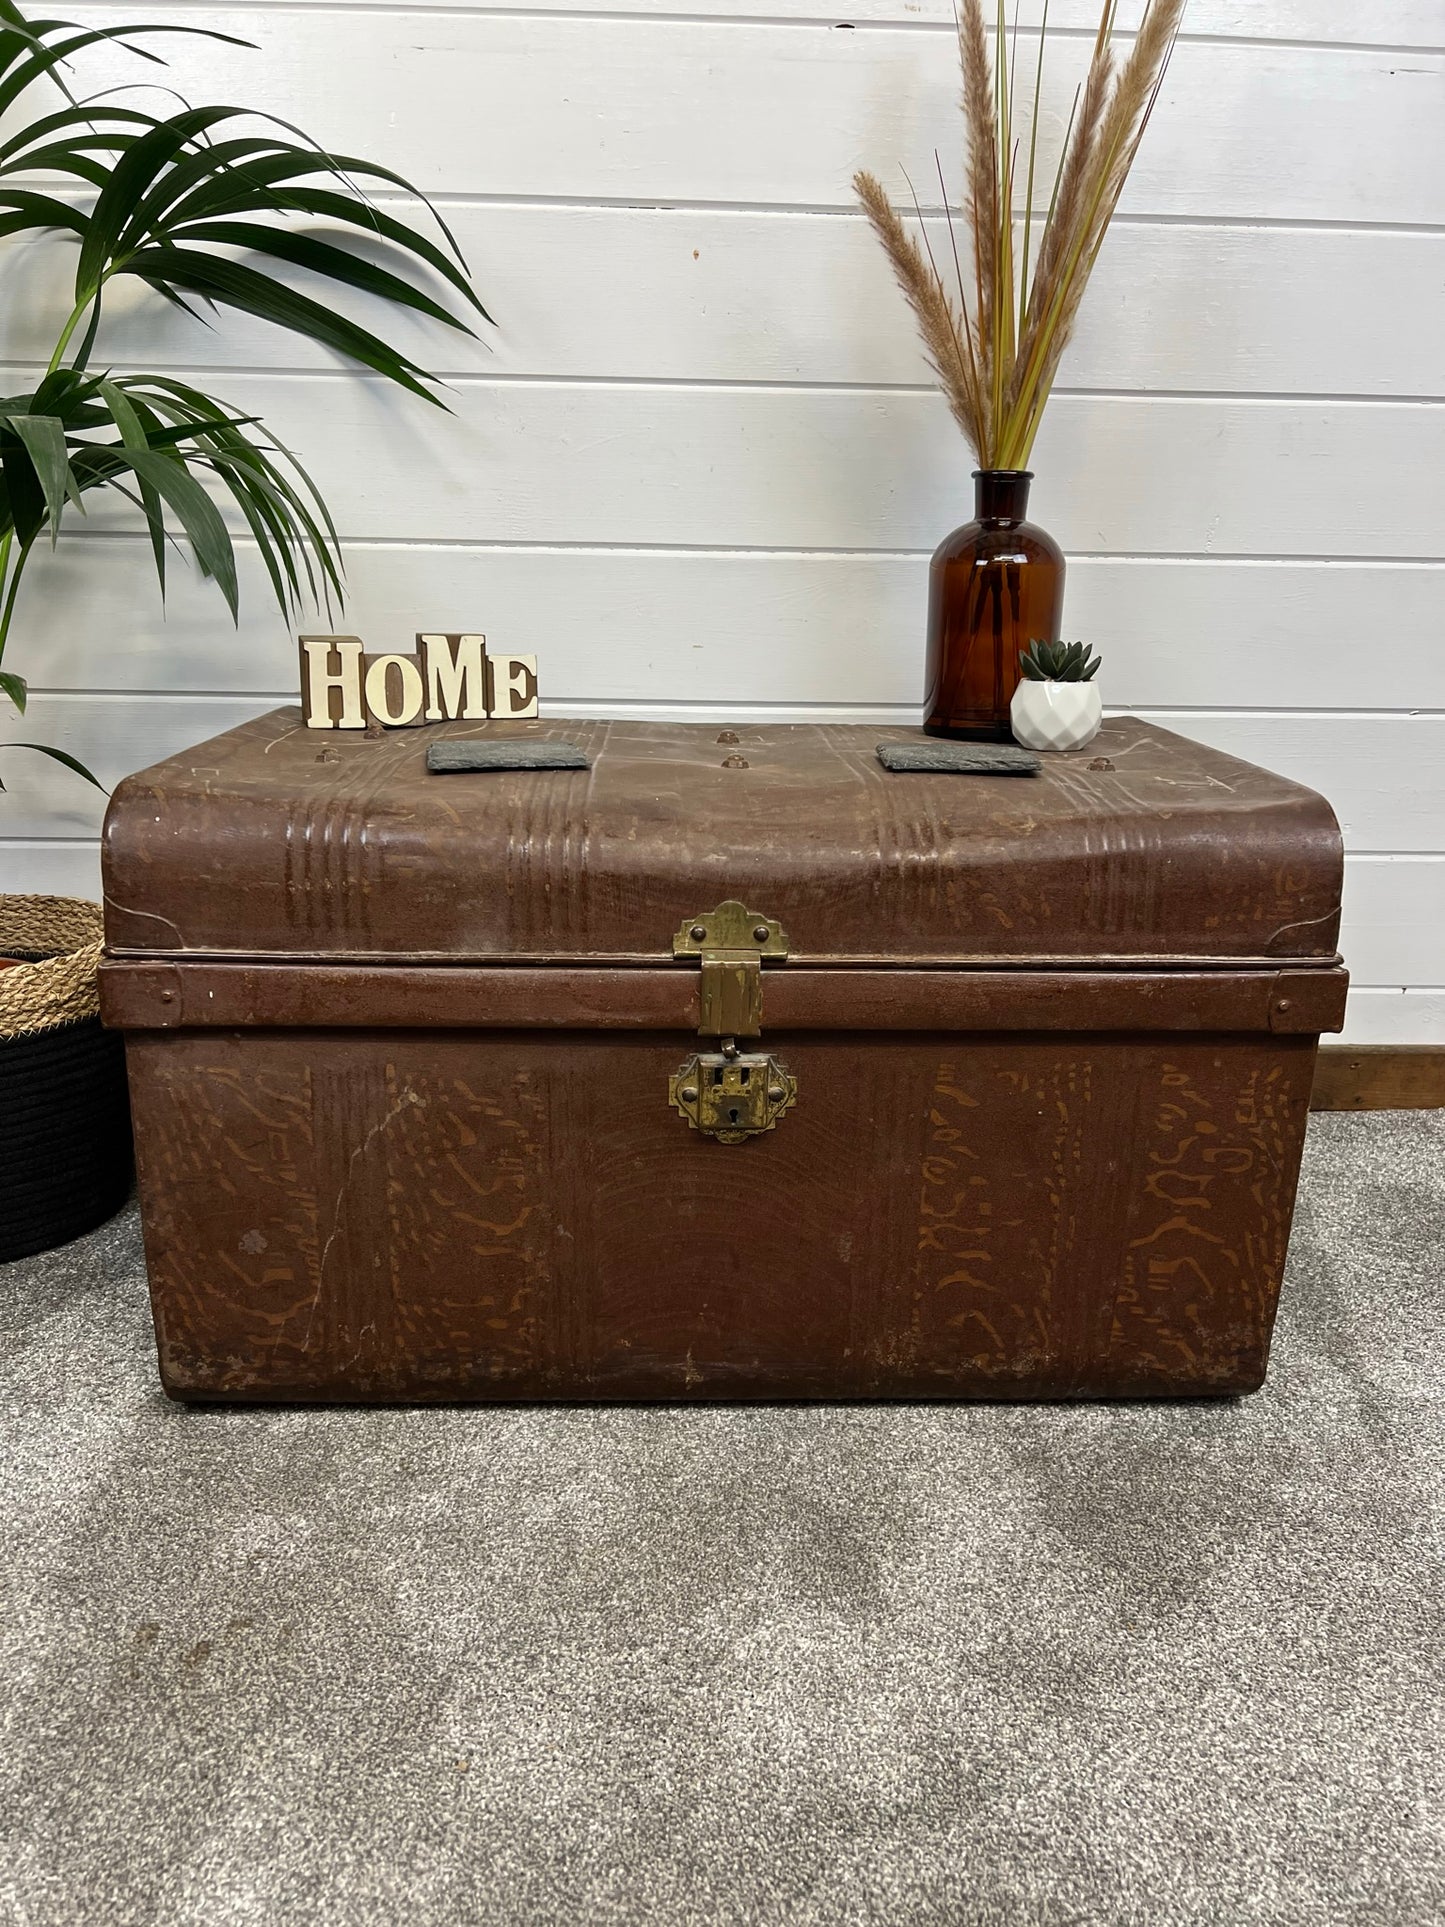 Vintage Metal Travel Chest Trunk Rustic Home Coffee Table Blanket Storage Box